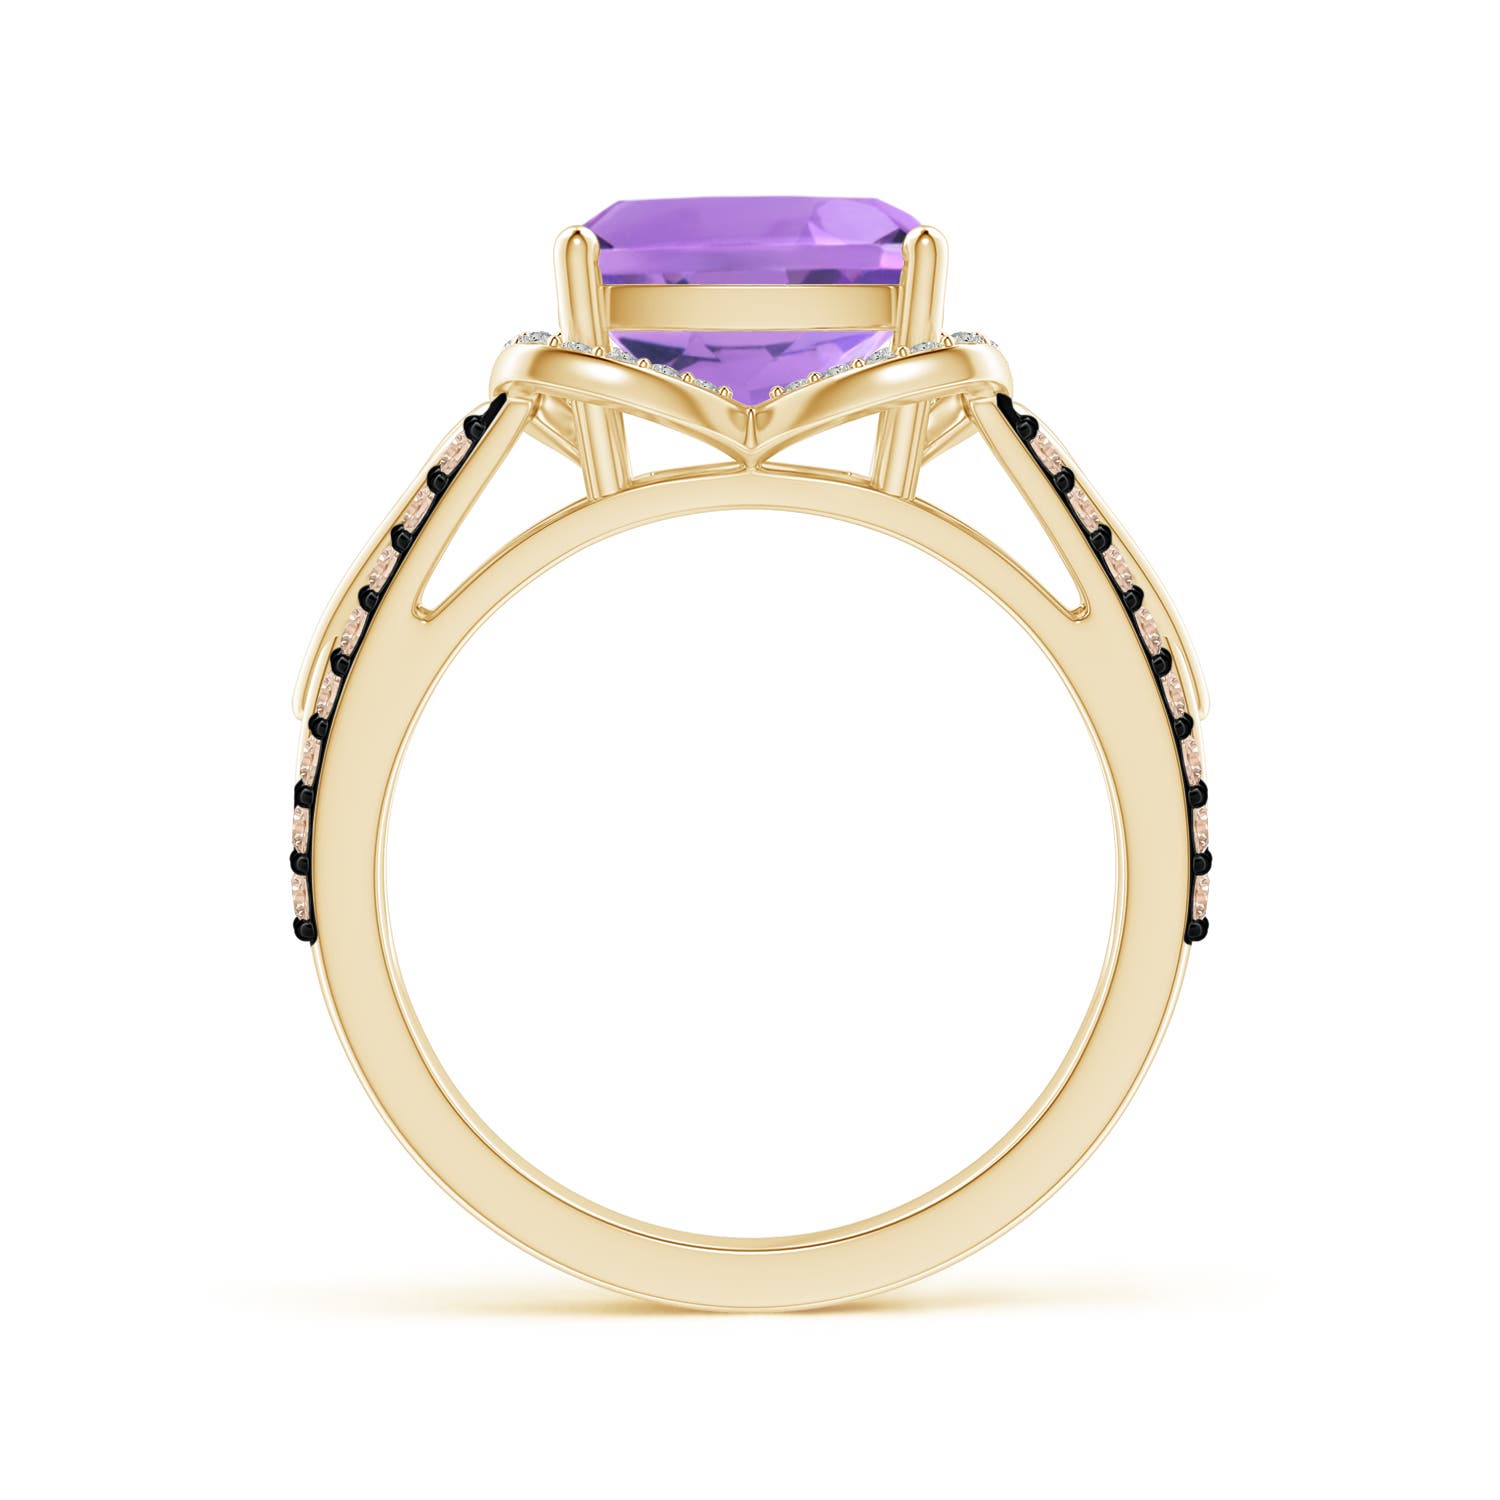 A - Amethyst / 3.61 CT / 14 KT Yellow Gold